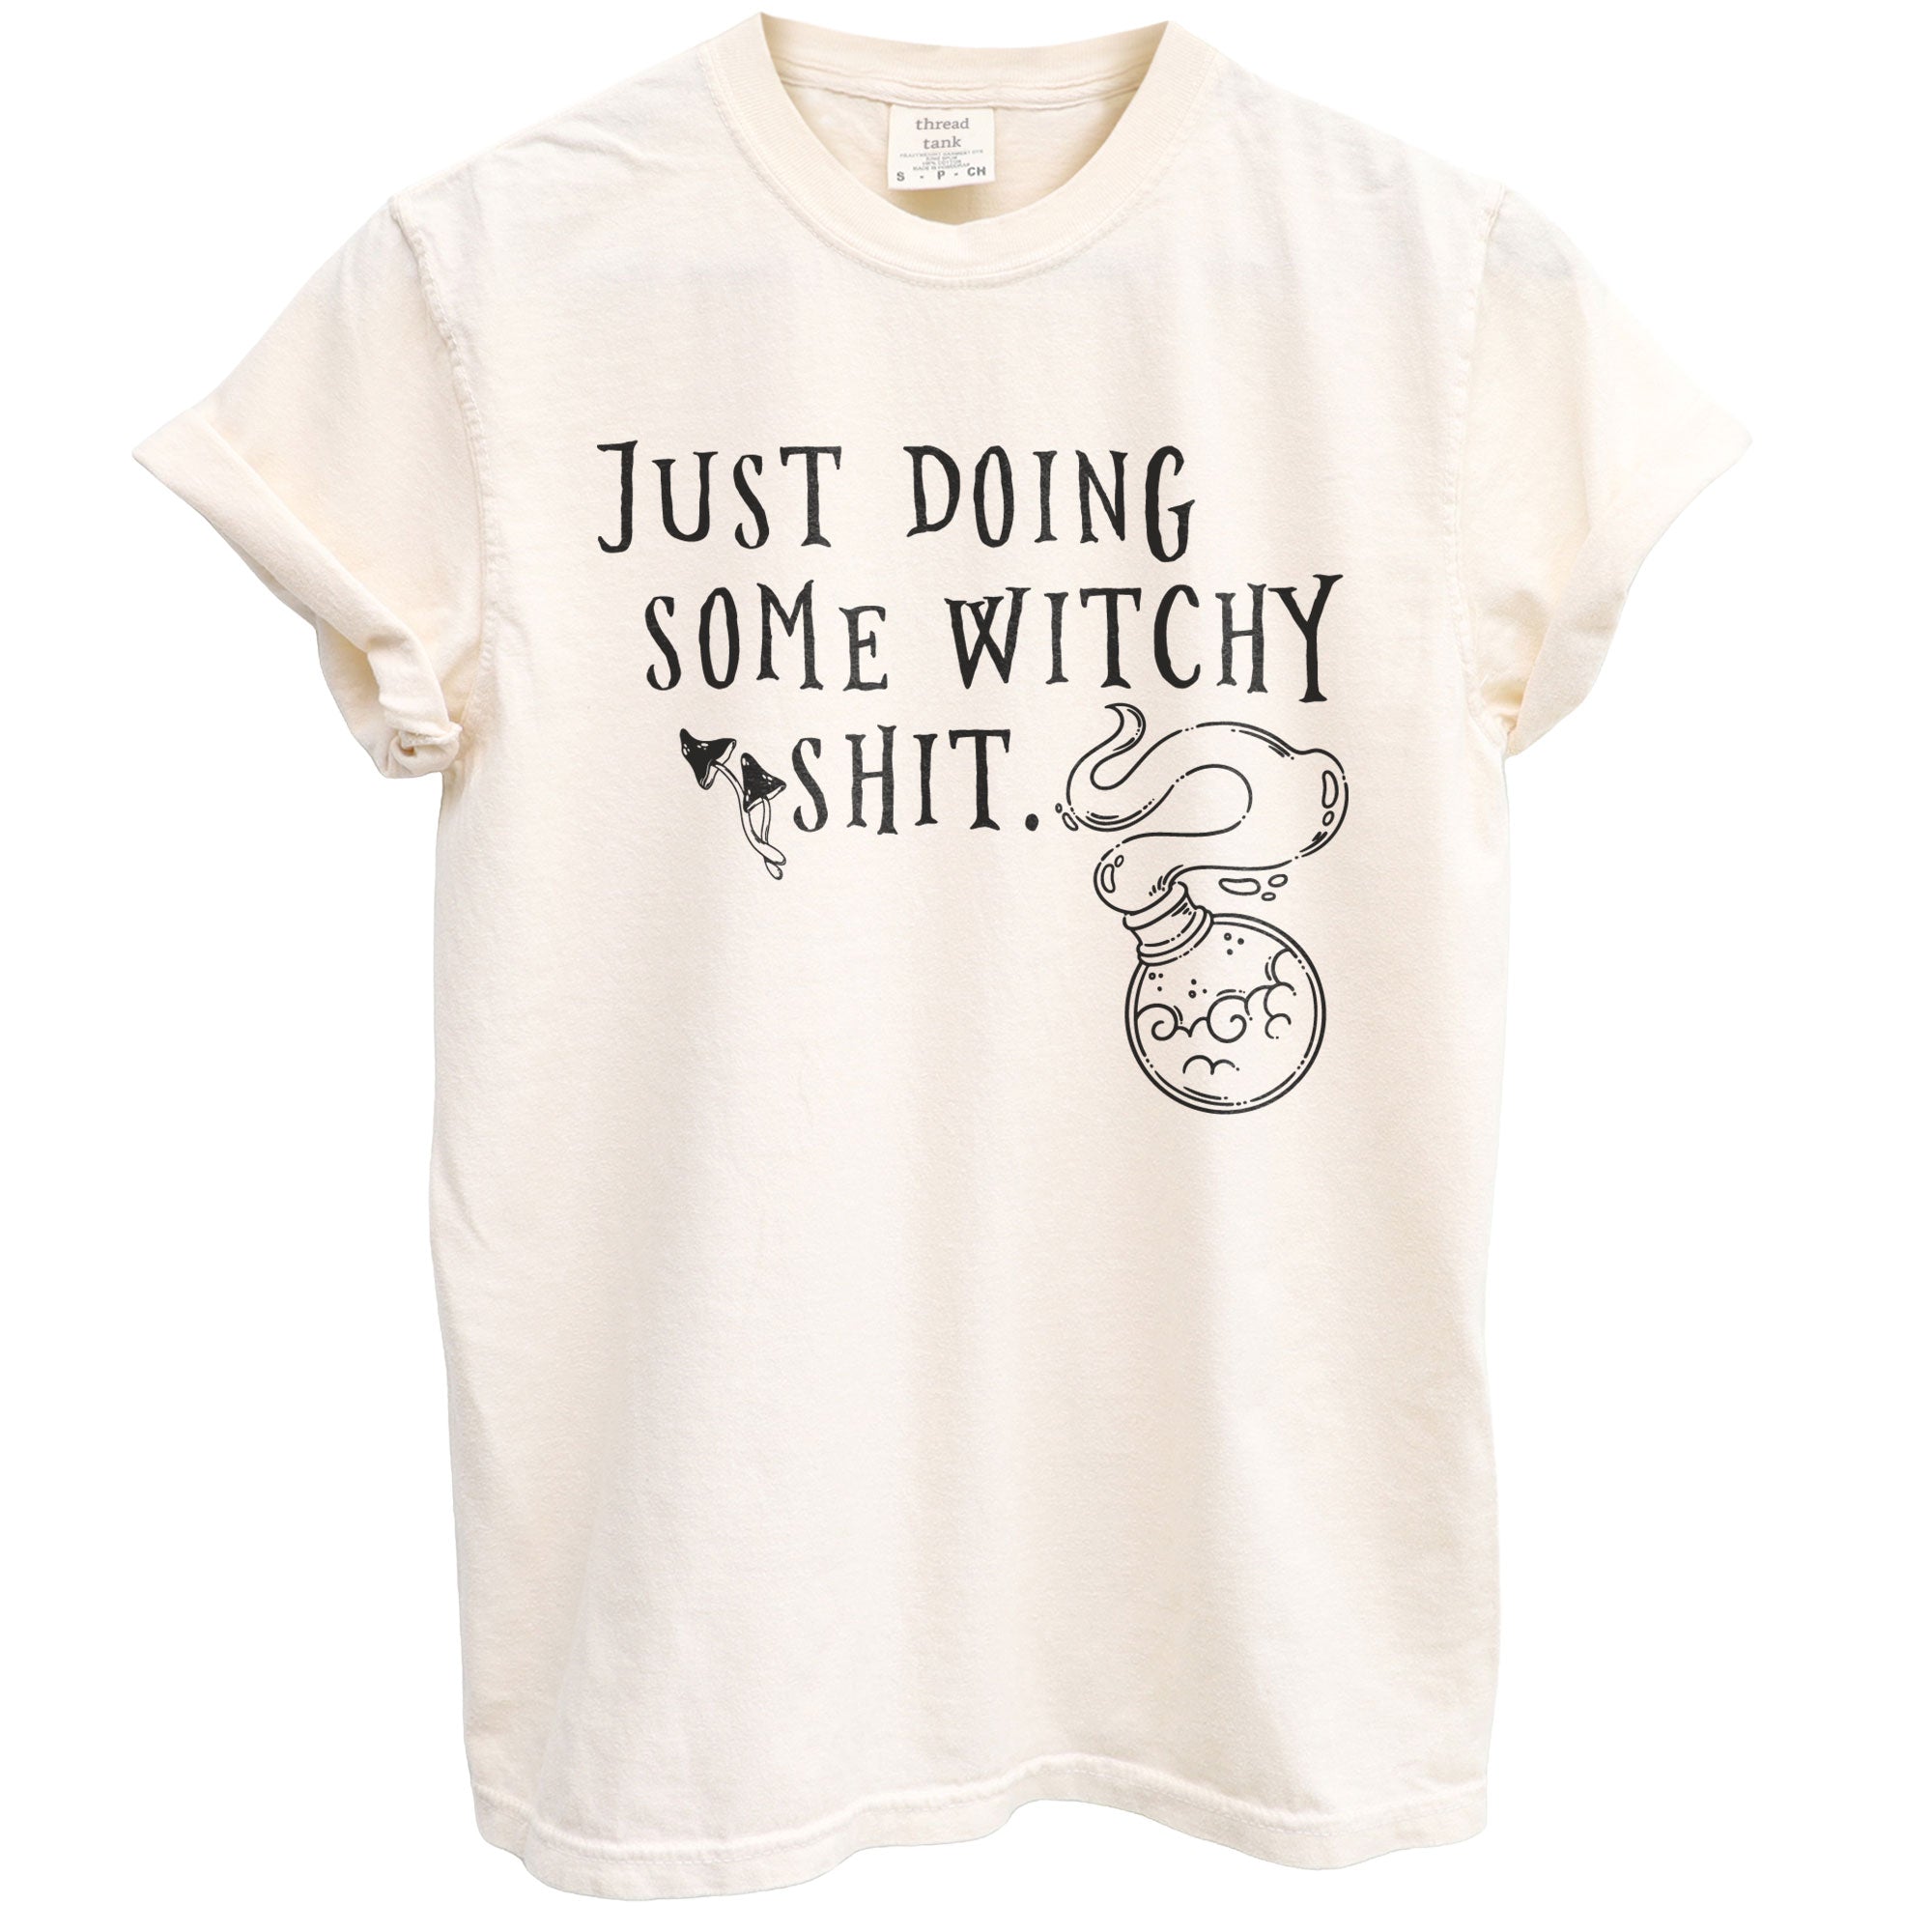 just doing some witchy shit oversized garment dyed shirt